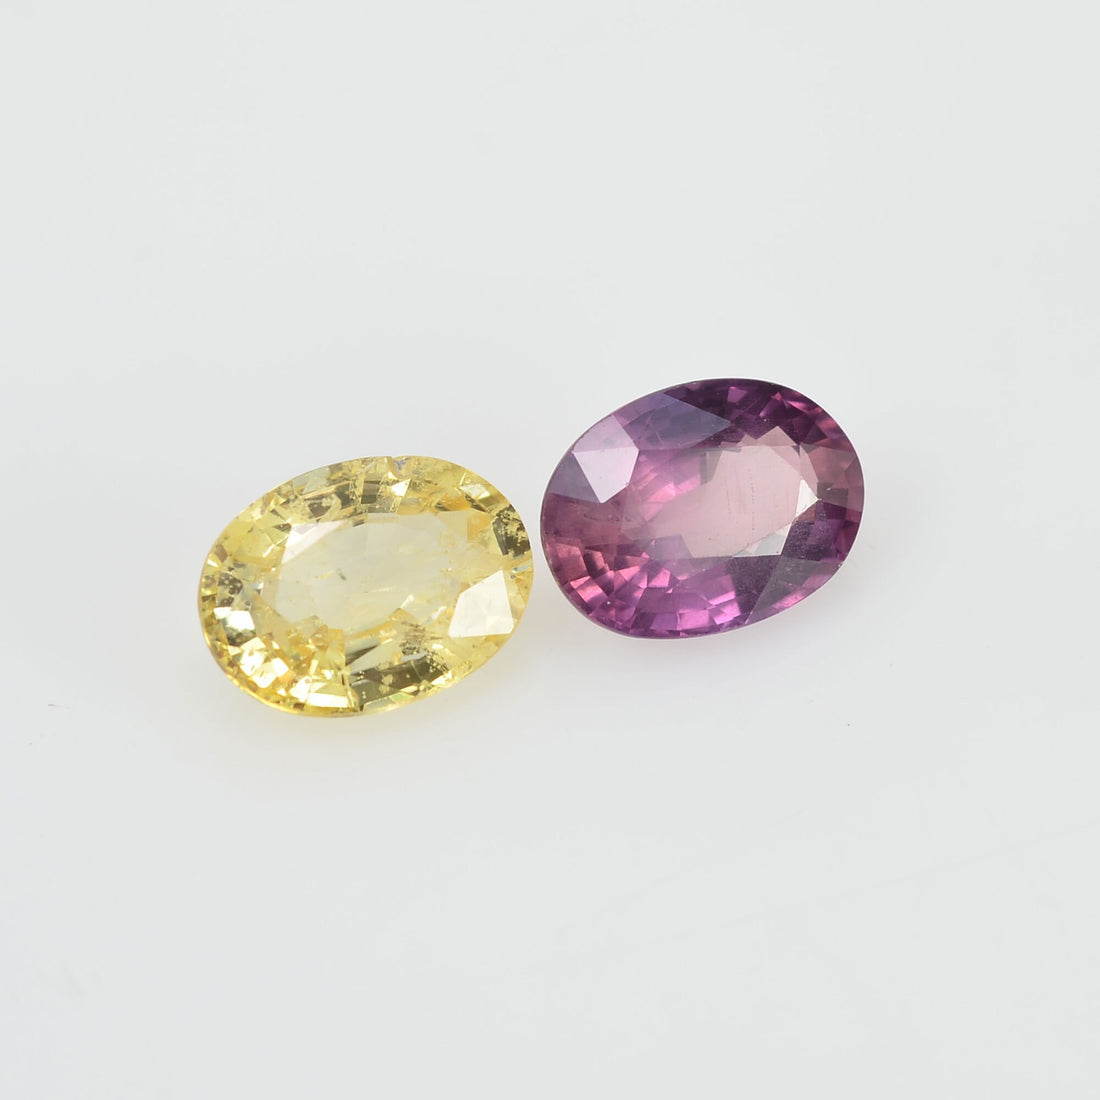 1.82 cts Natural Fancy Sapphire Loose Pair Gemstone Oval Cut